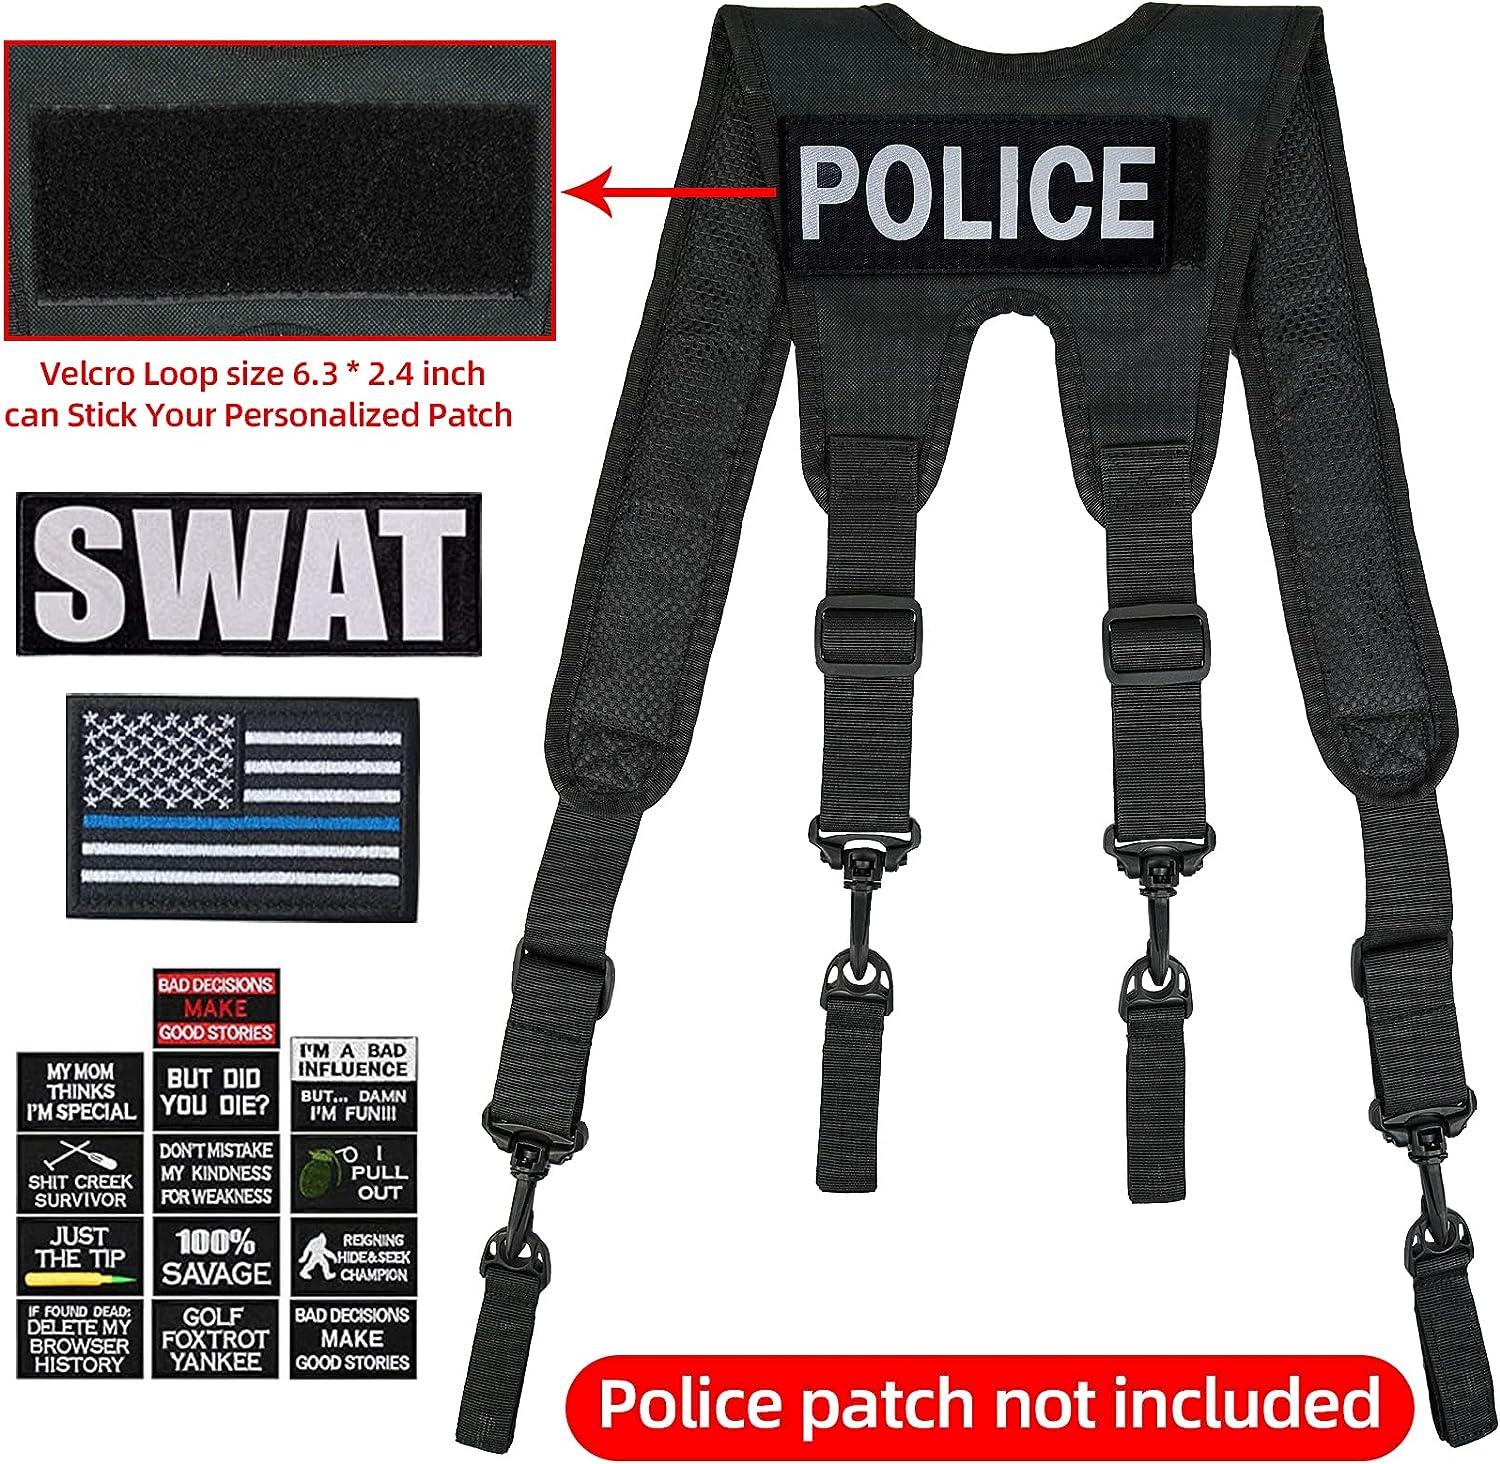 KUNN Tactical Suspenders Law Enforcement Police Harness for Duty Belt with  Padded,Patch and Key Holder,XL X-Large size for 5'9 to 6'4 tall